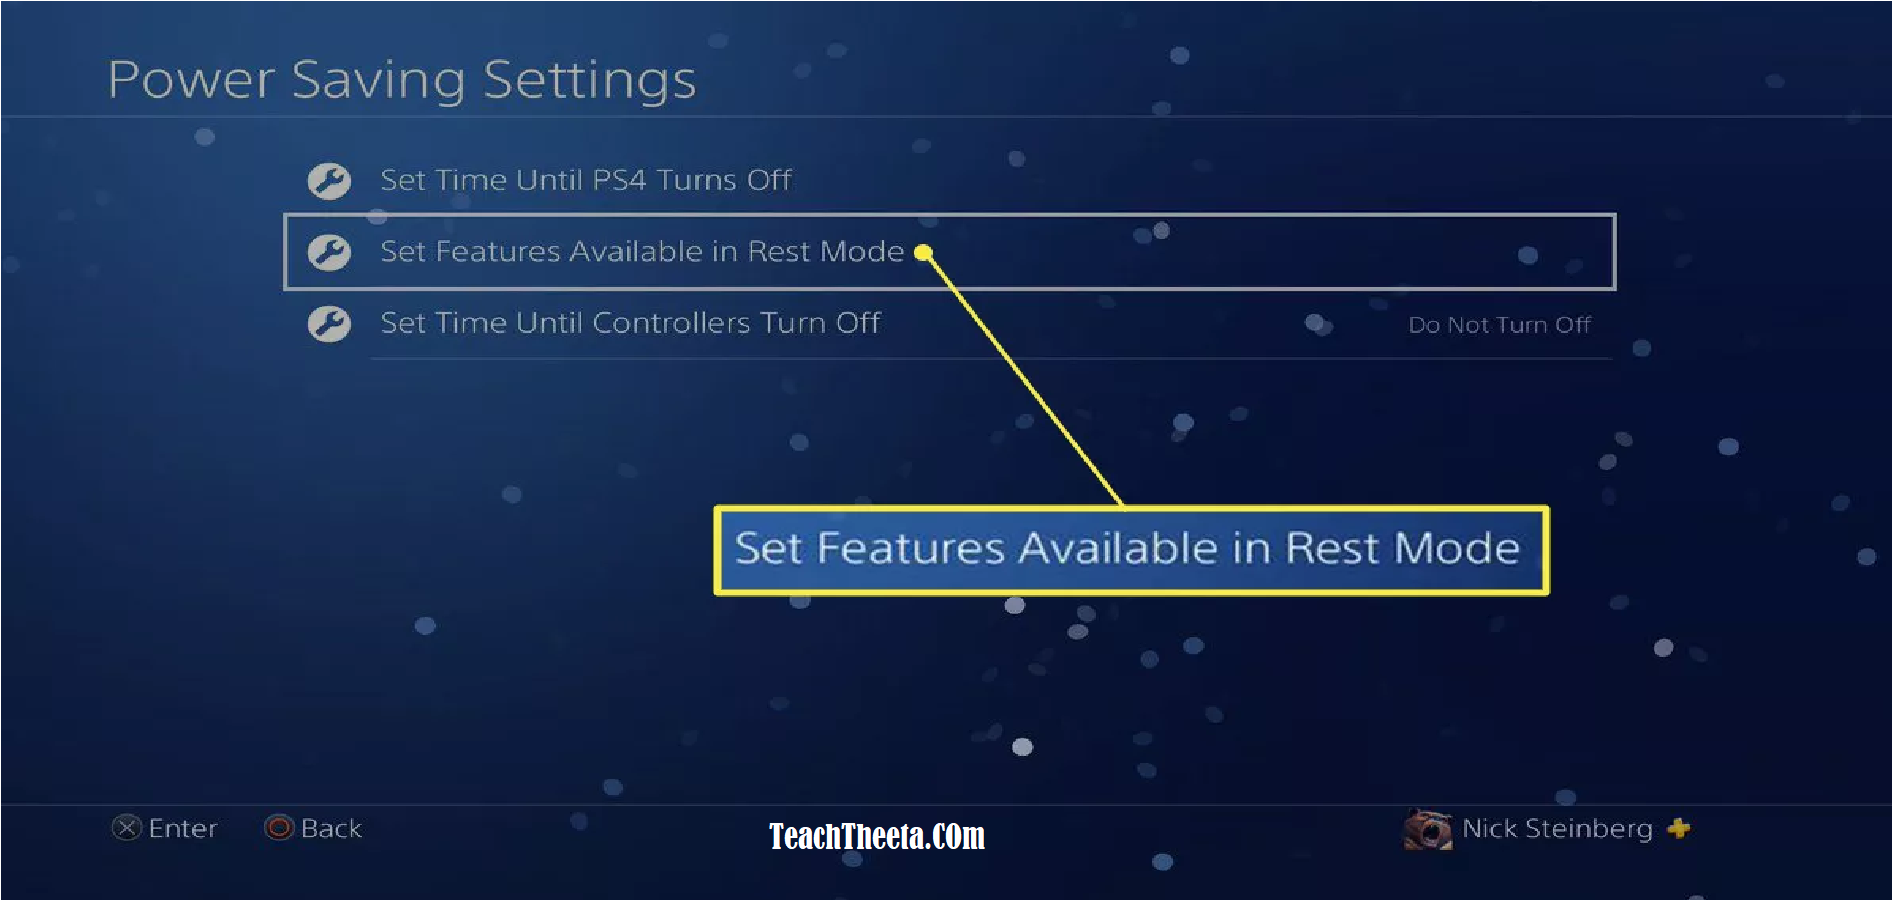 Select Set Features Available in Rest Mode